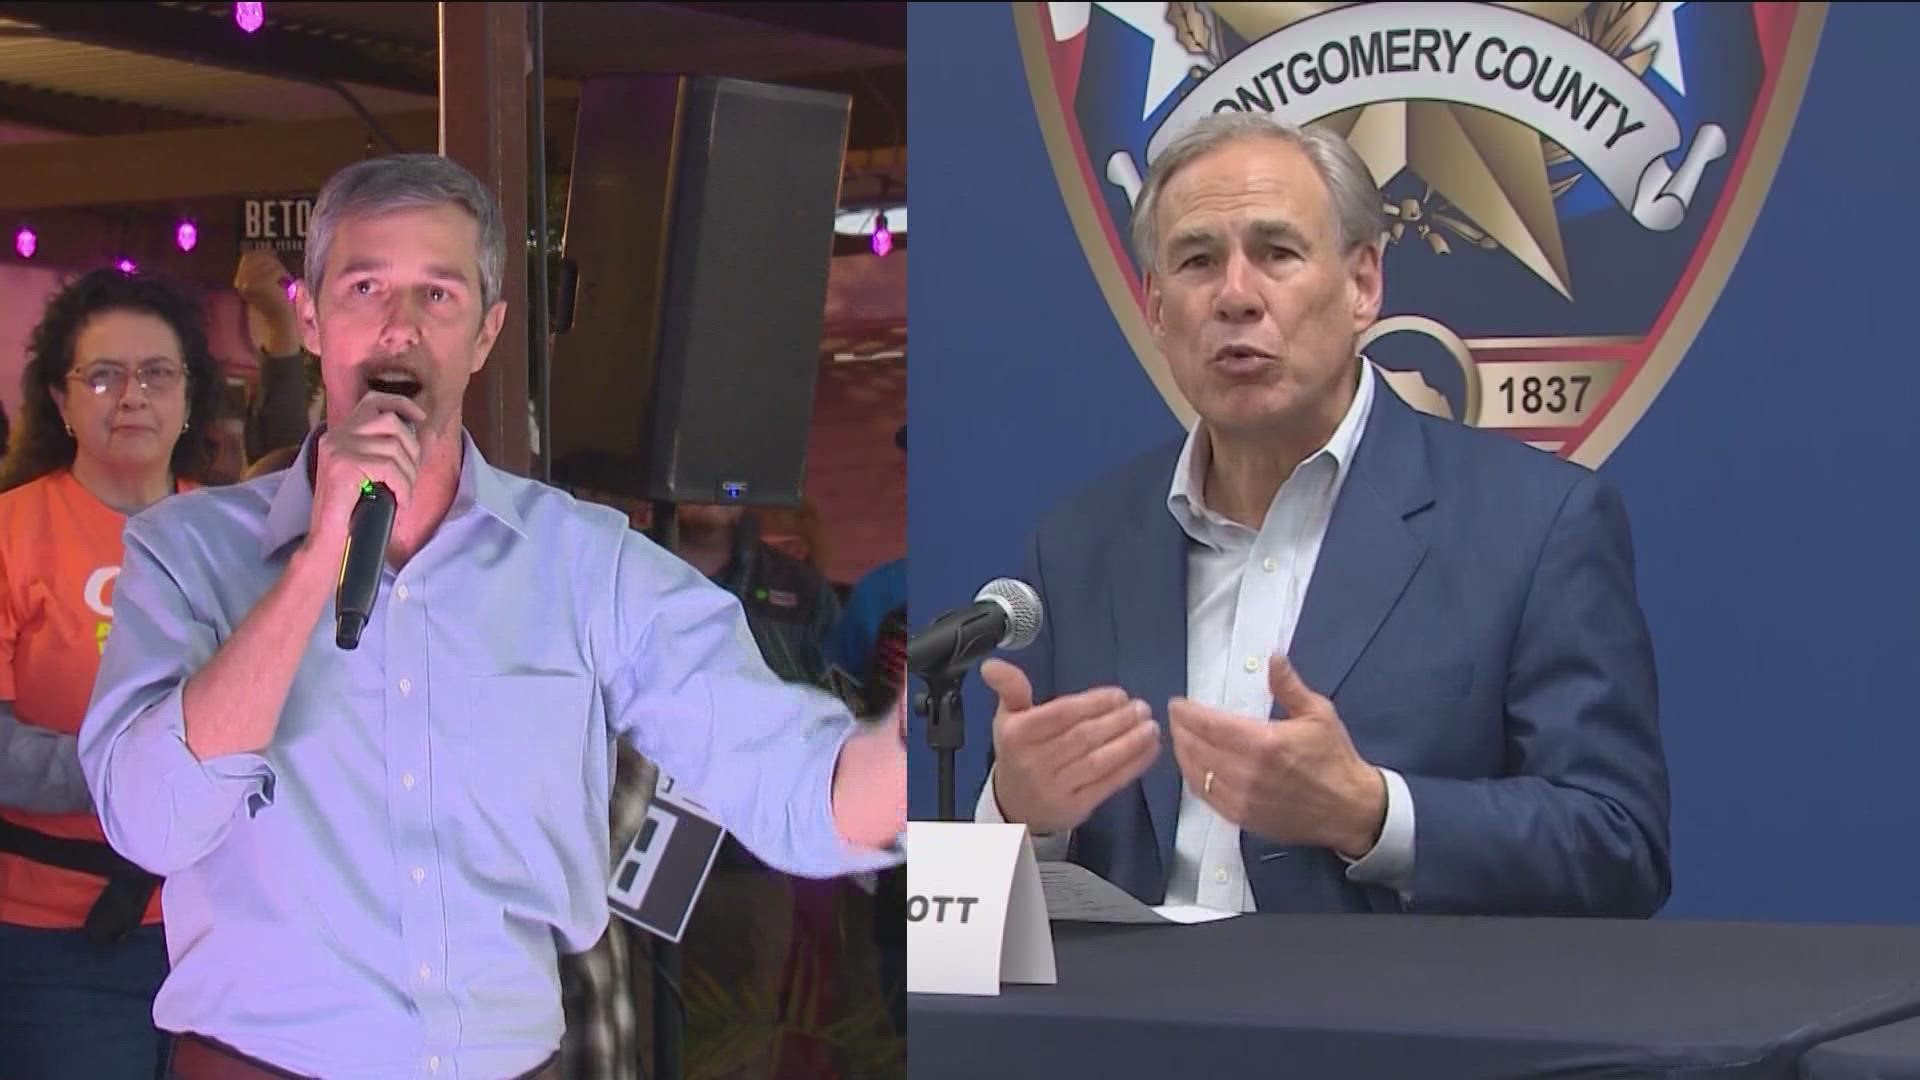 Incumbent Republican Gov. Greg Abbott and Democratic nominee Beto O'Rourke have agreed to a gubernatorial debate in South Texas.